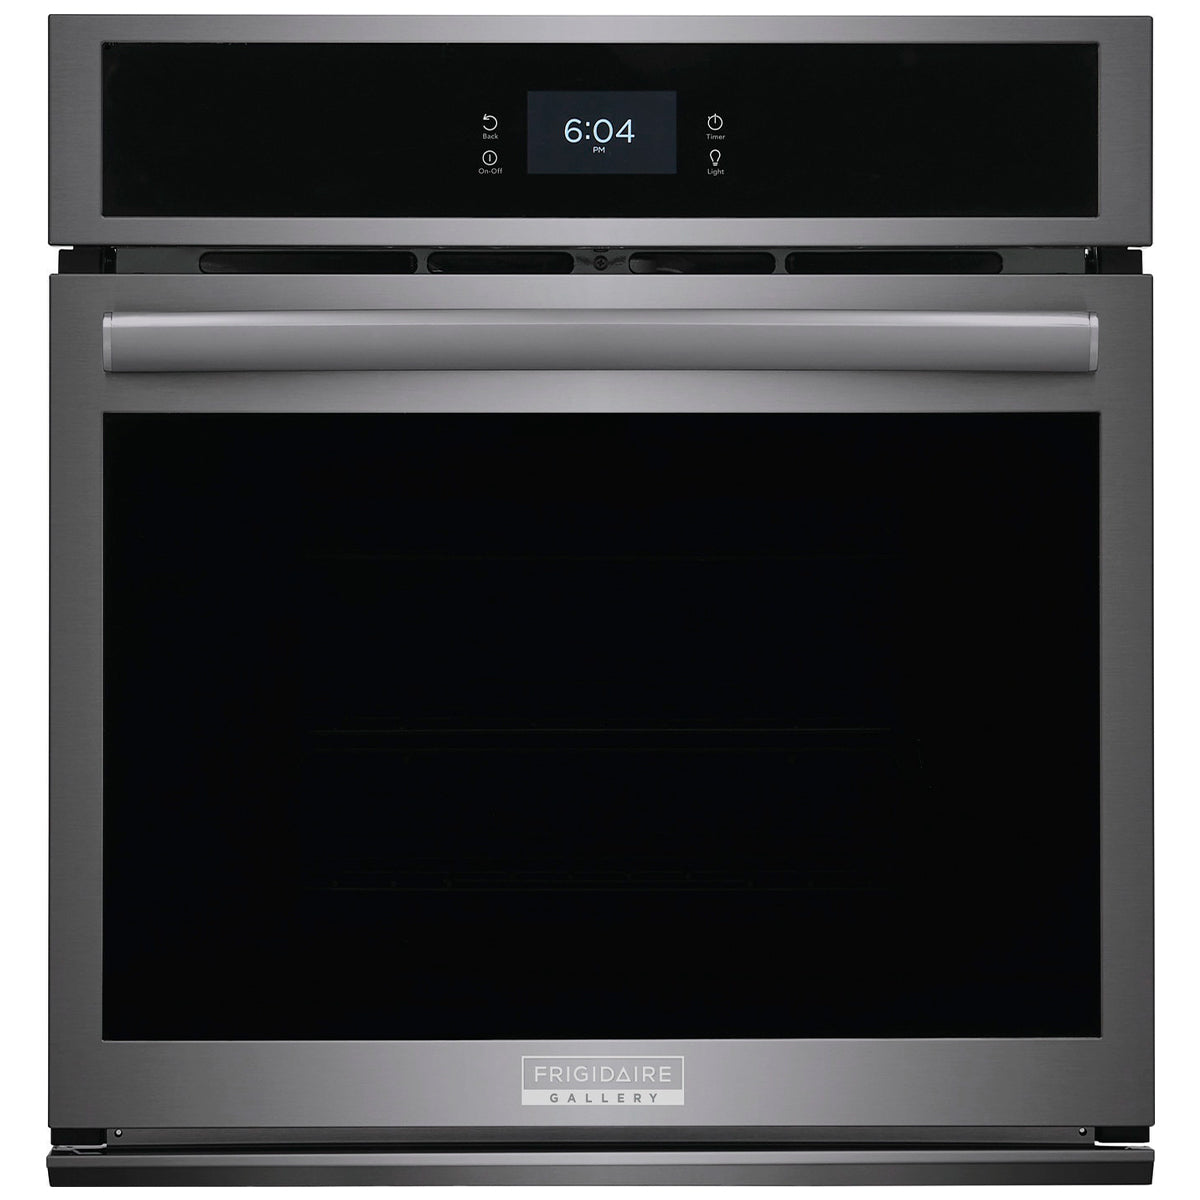 GCWS2767AF - WALL OVENS - Frigidaire Gallery - Single Oven - Stainless Steel - Open Box - Wall ovens - BonPrix Électroménagers